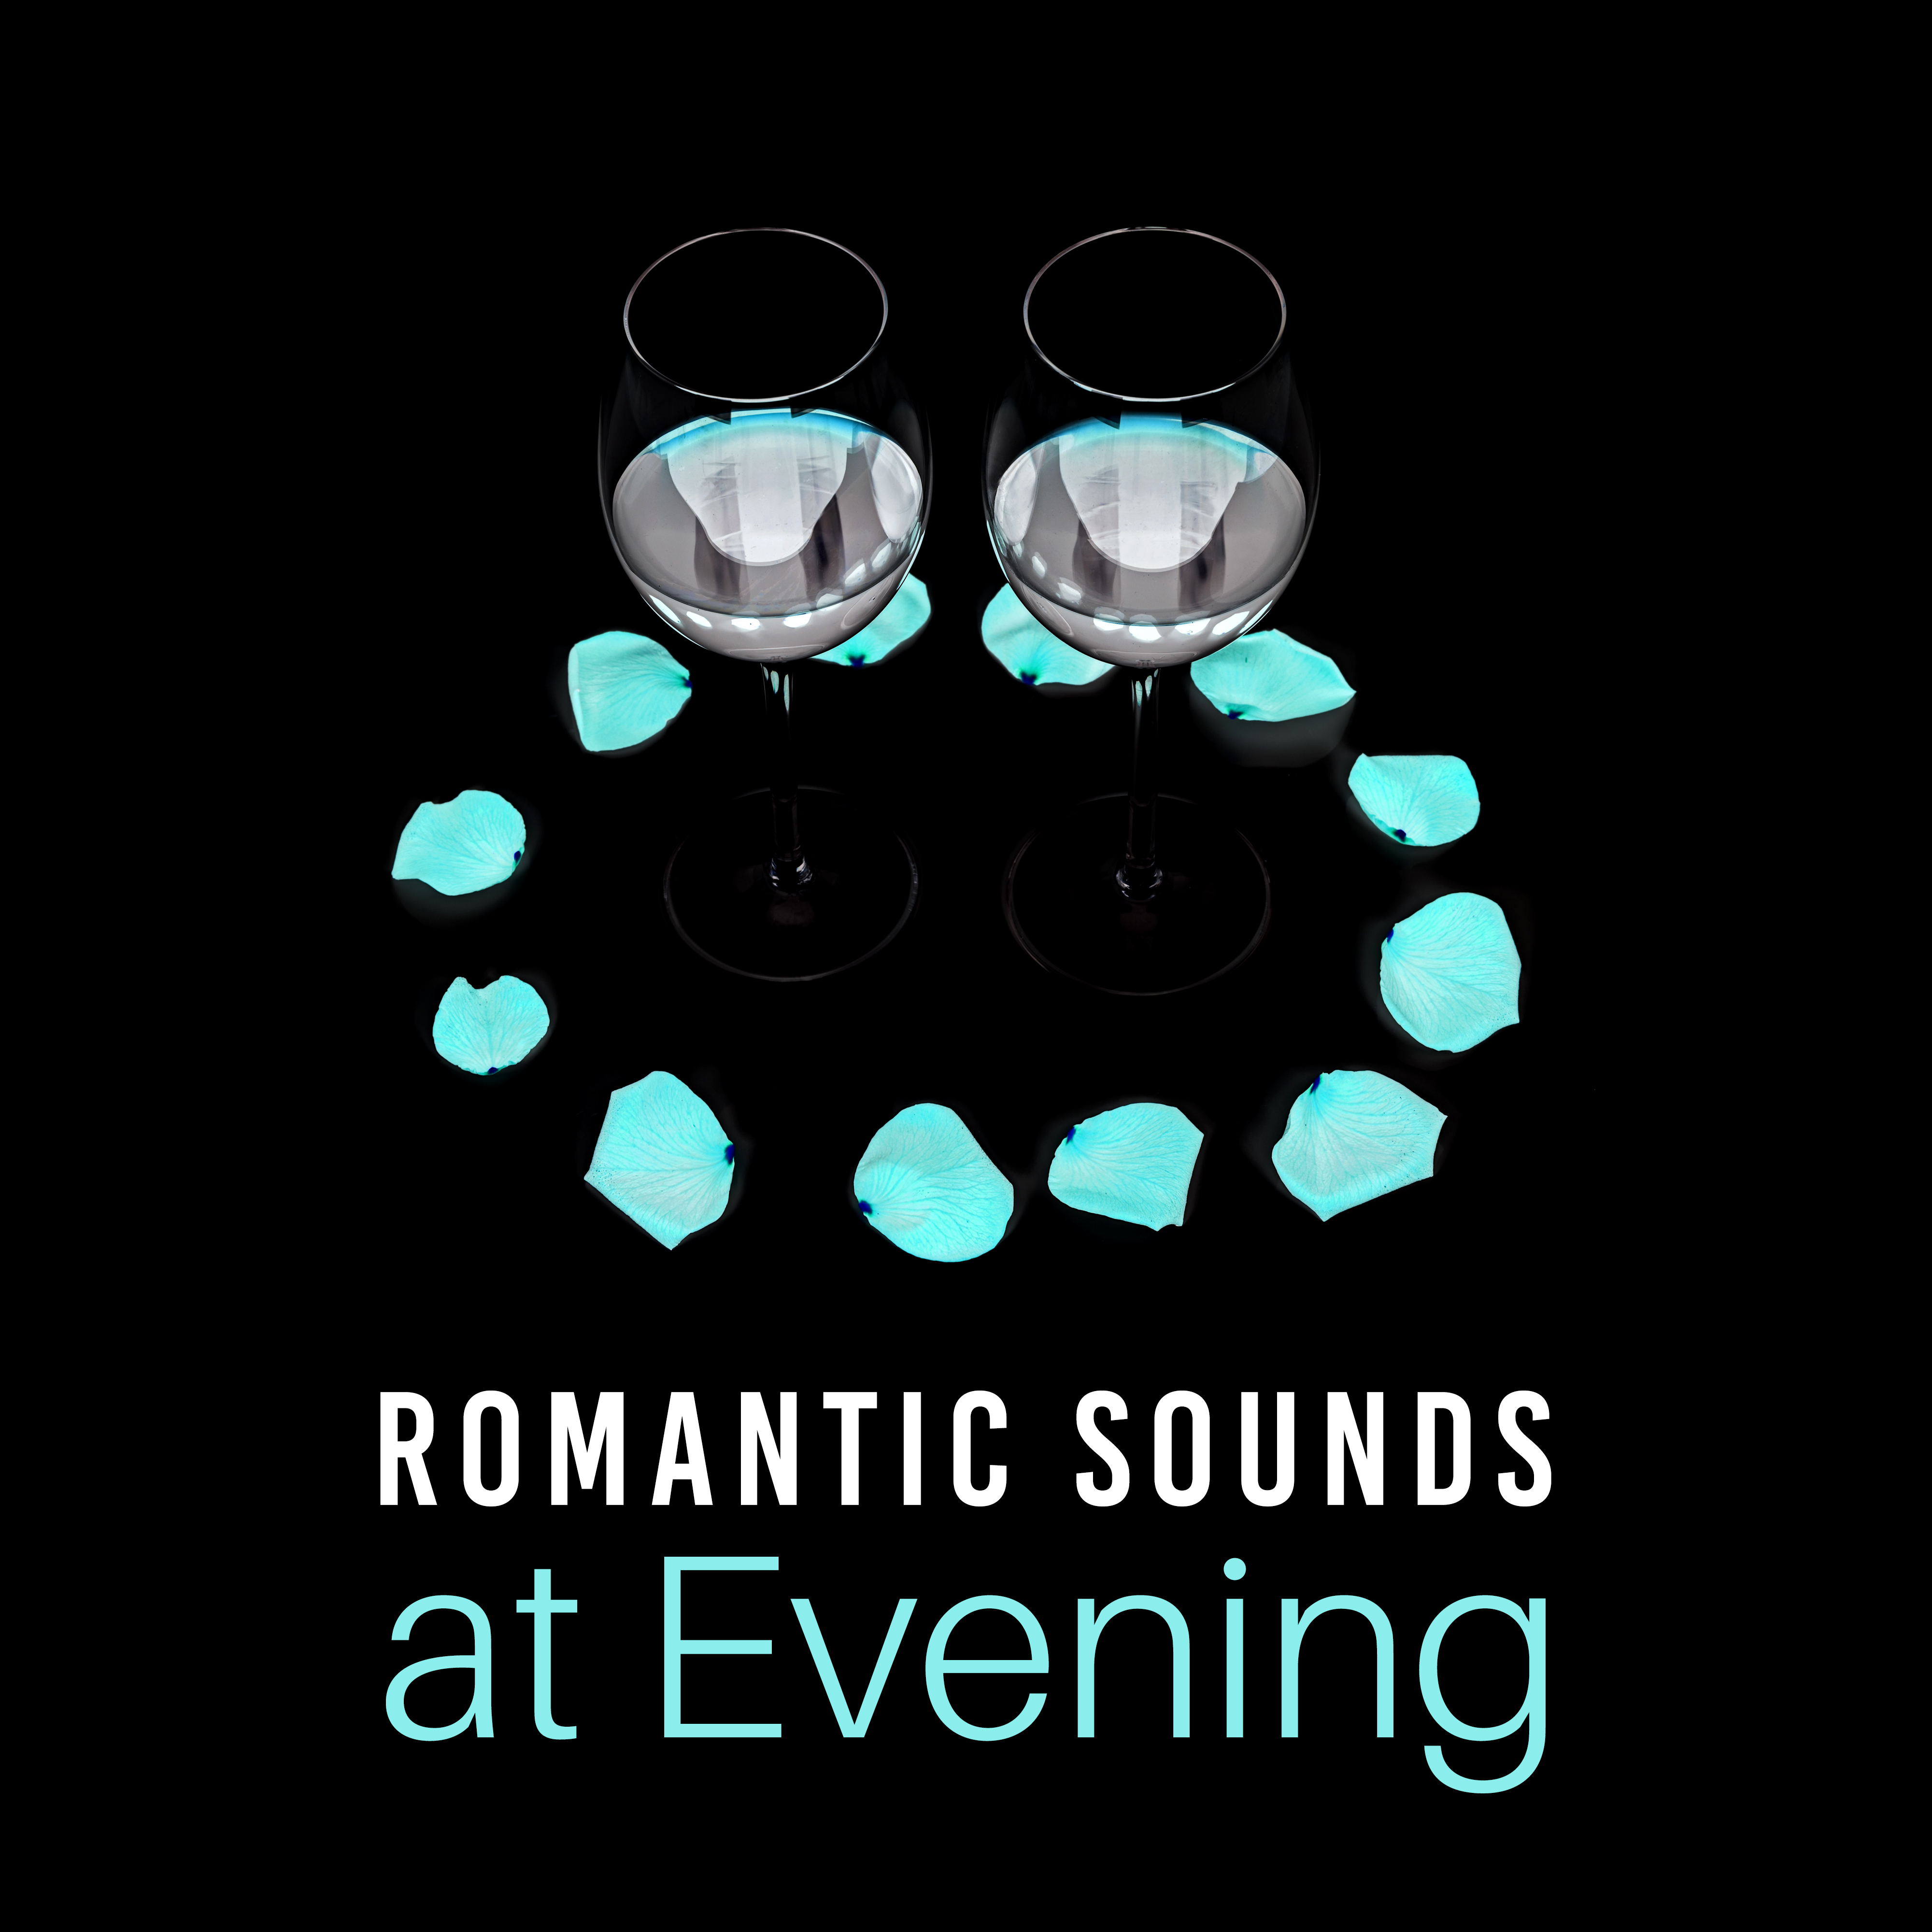 Romantic Sounds at Evening  Sensual Jazz Music, Erotic Lounge, Romantic Dinner by Candlelight,  Piano Music, Hot Massage